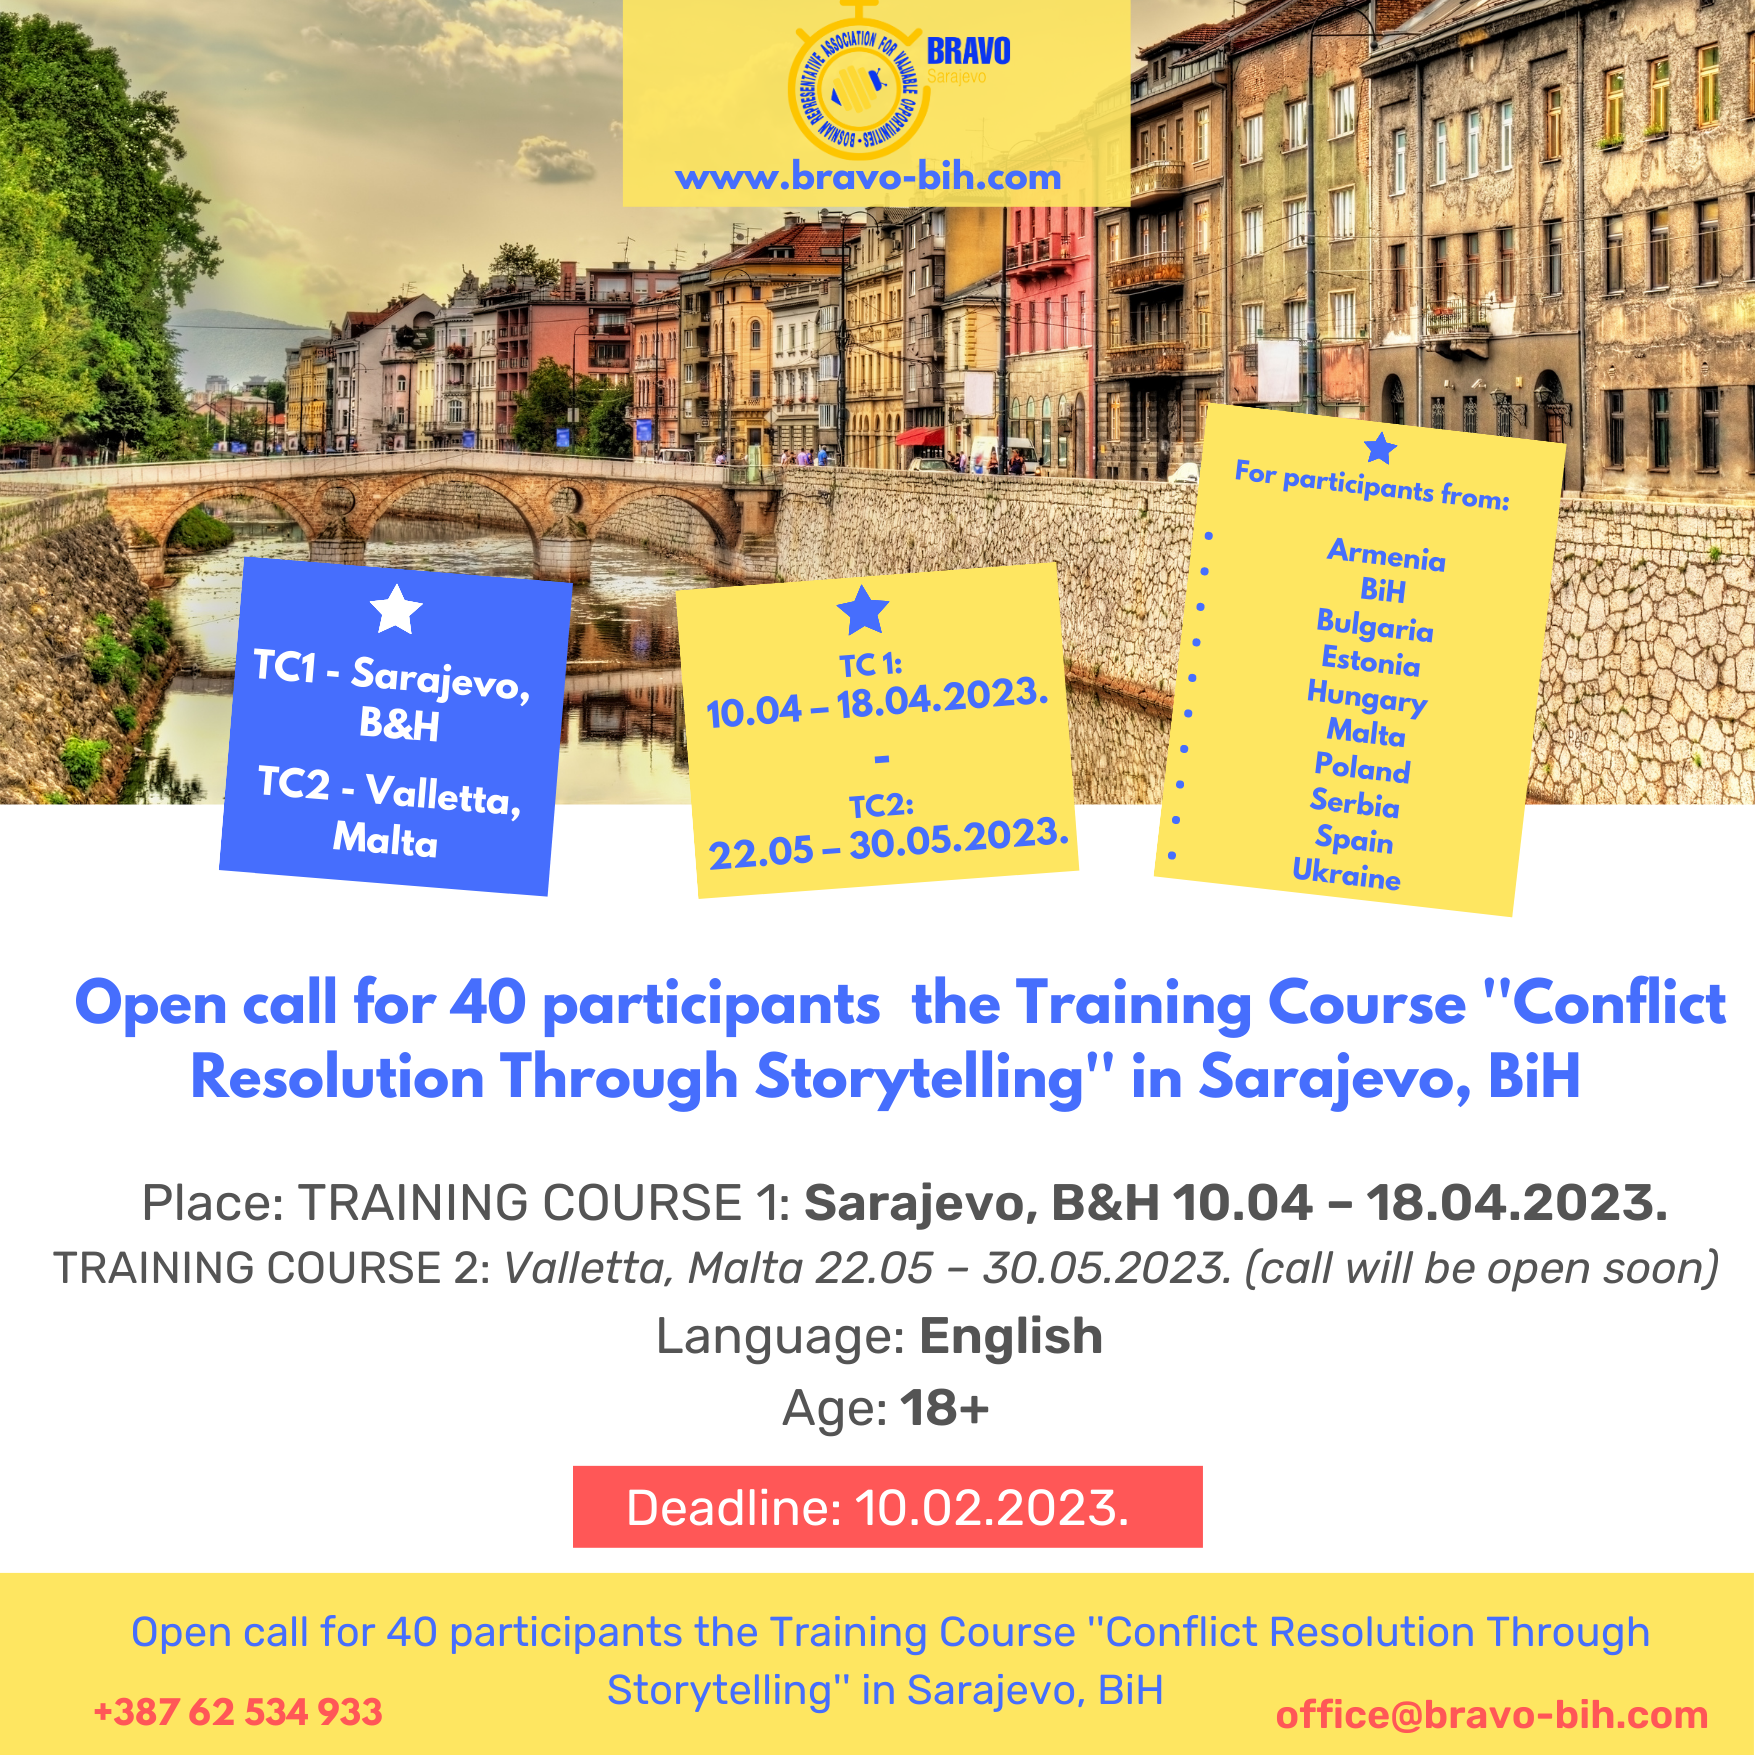 Open call for 40 participants for the Training Course ”Conflict Resolution Through Storytelling” in Sarajevo, BiH